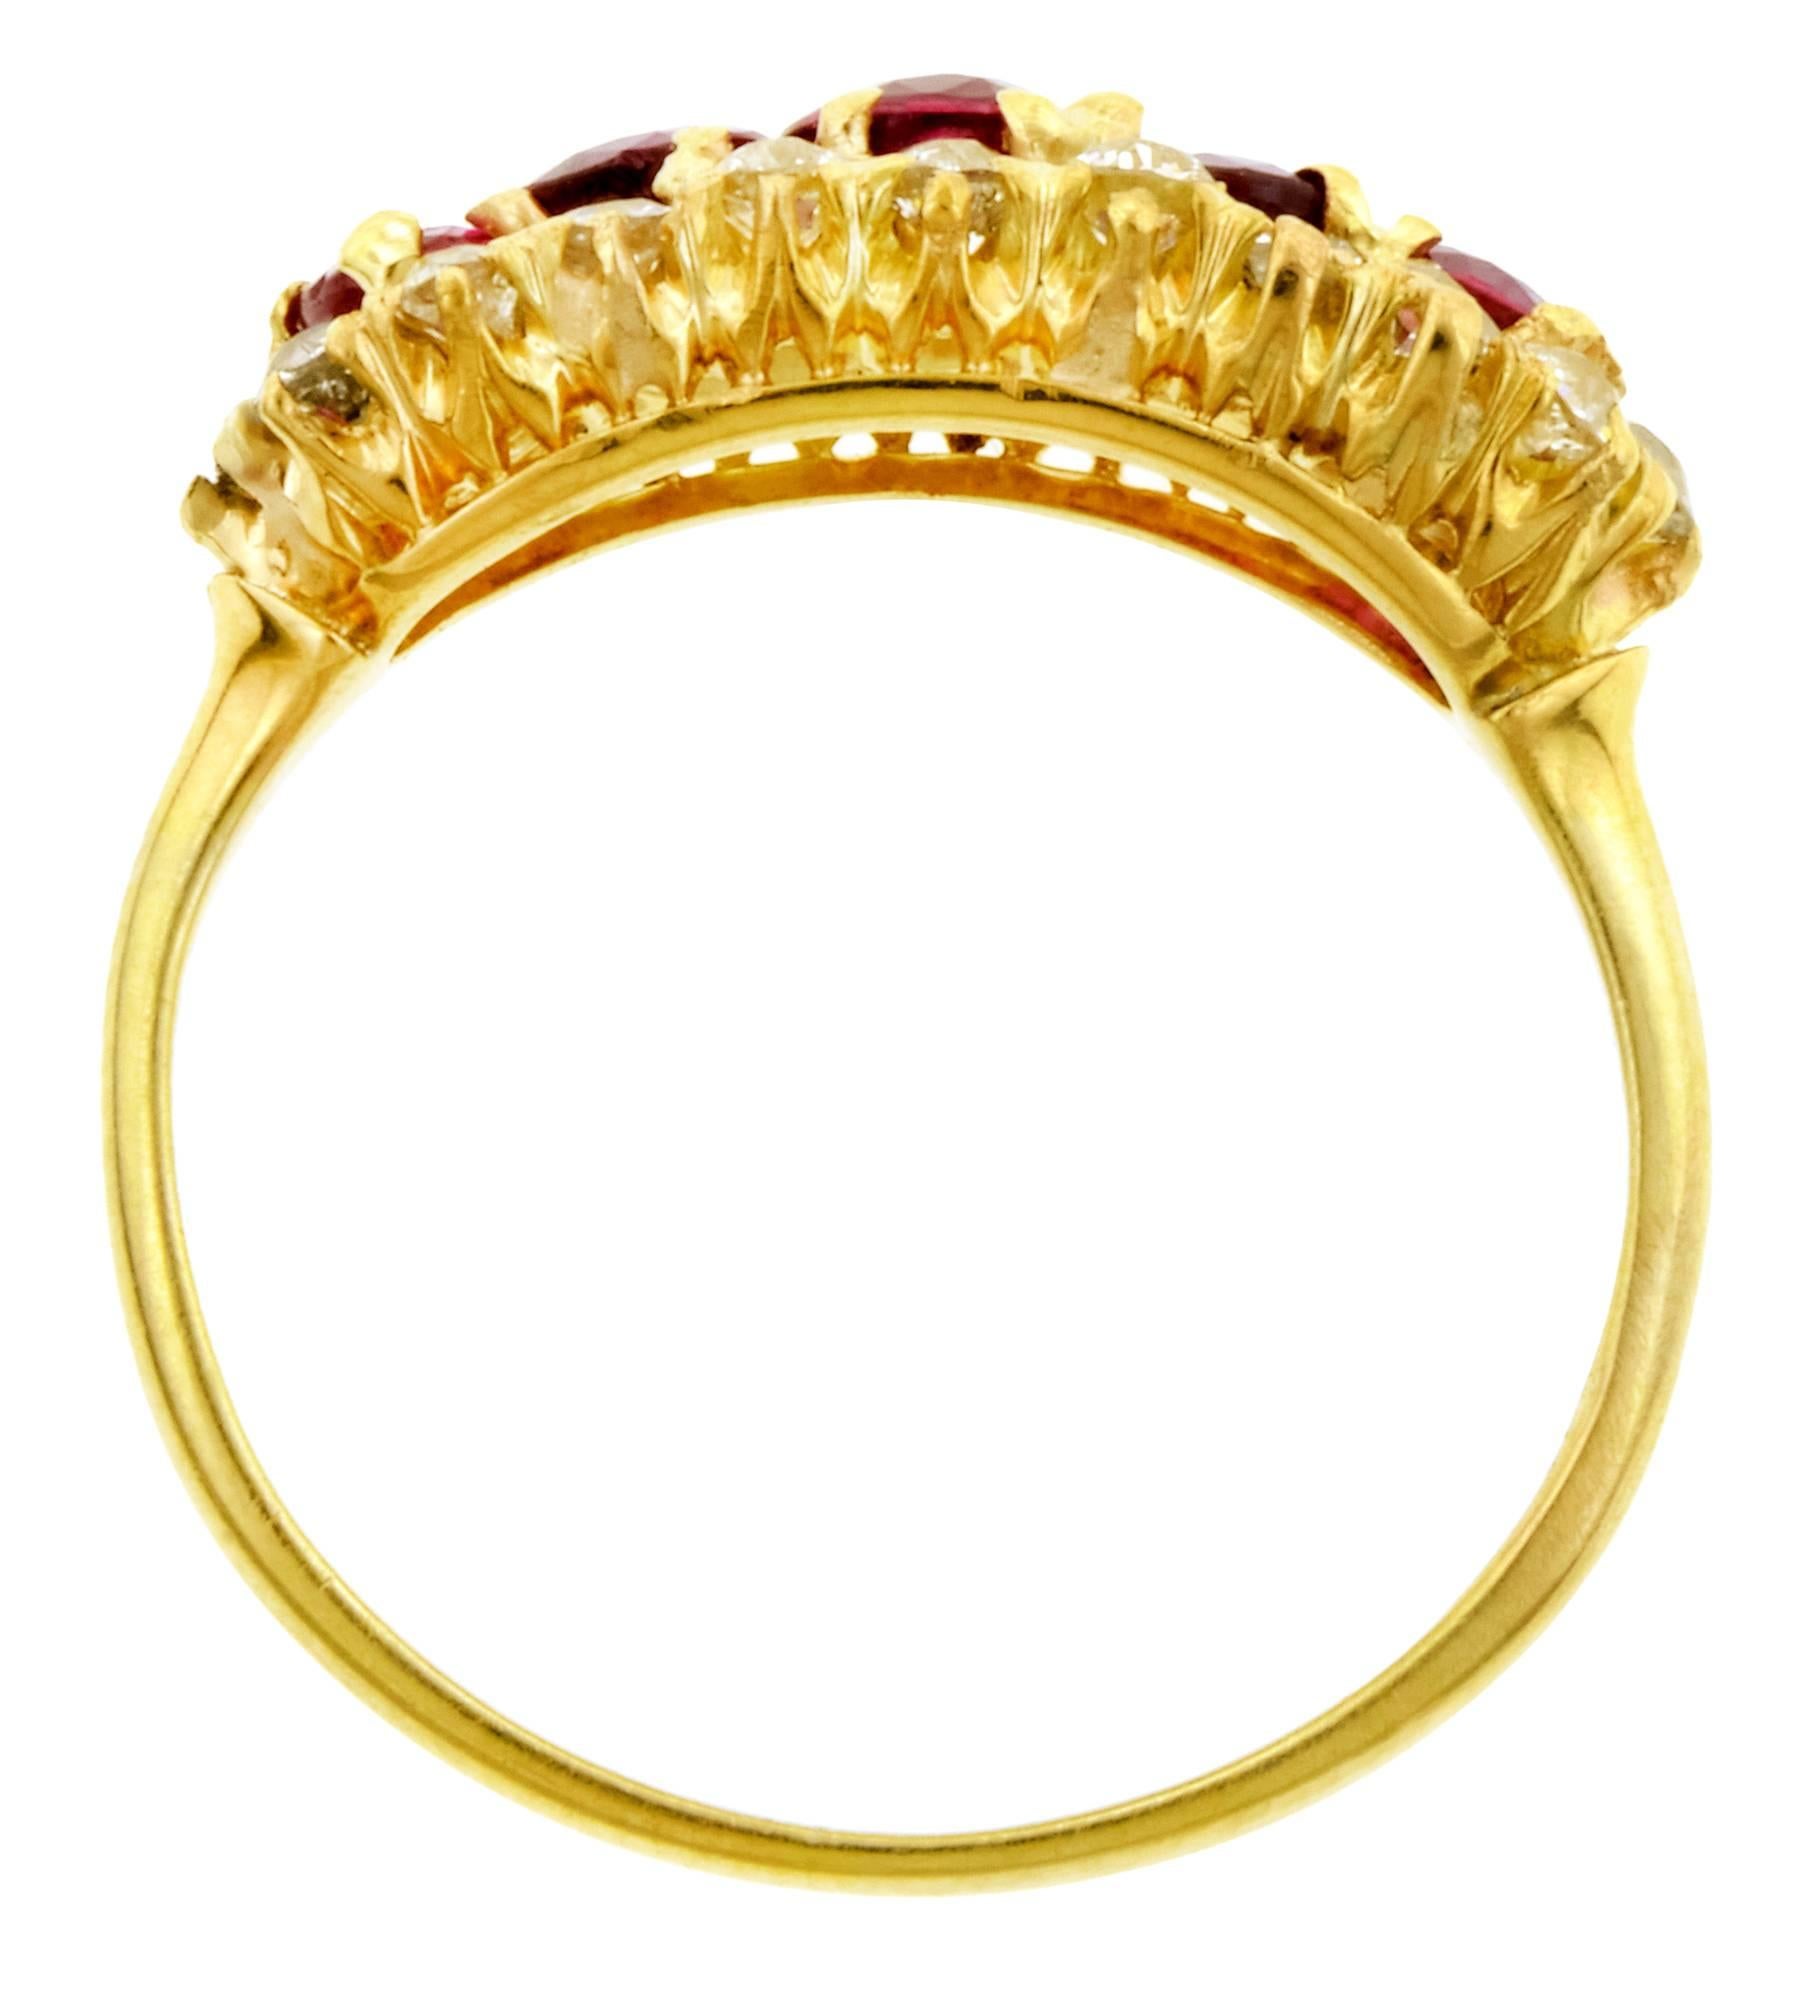 Victorian ruby & diamond ring centering five graduating oval brilliant cut rubies weighing approx 1.14ctw, framed by twenty round mixed cut diamonds weighing approx 0.40ctw. Cluster design, fashioned in 14K yellow gold. C.1860. size 5.